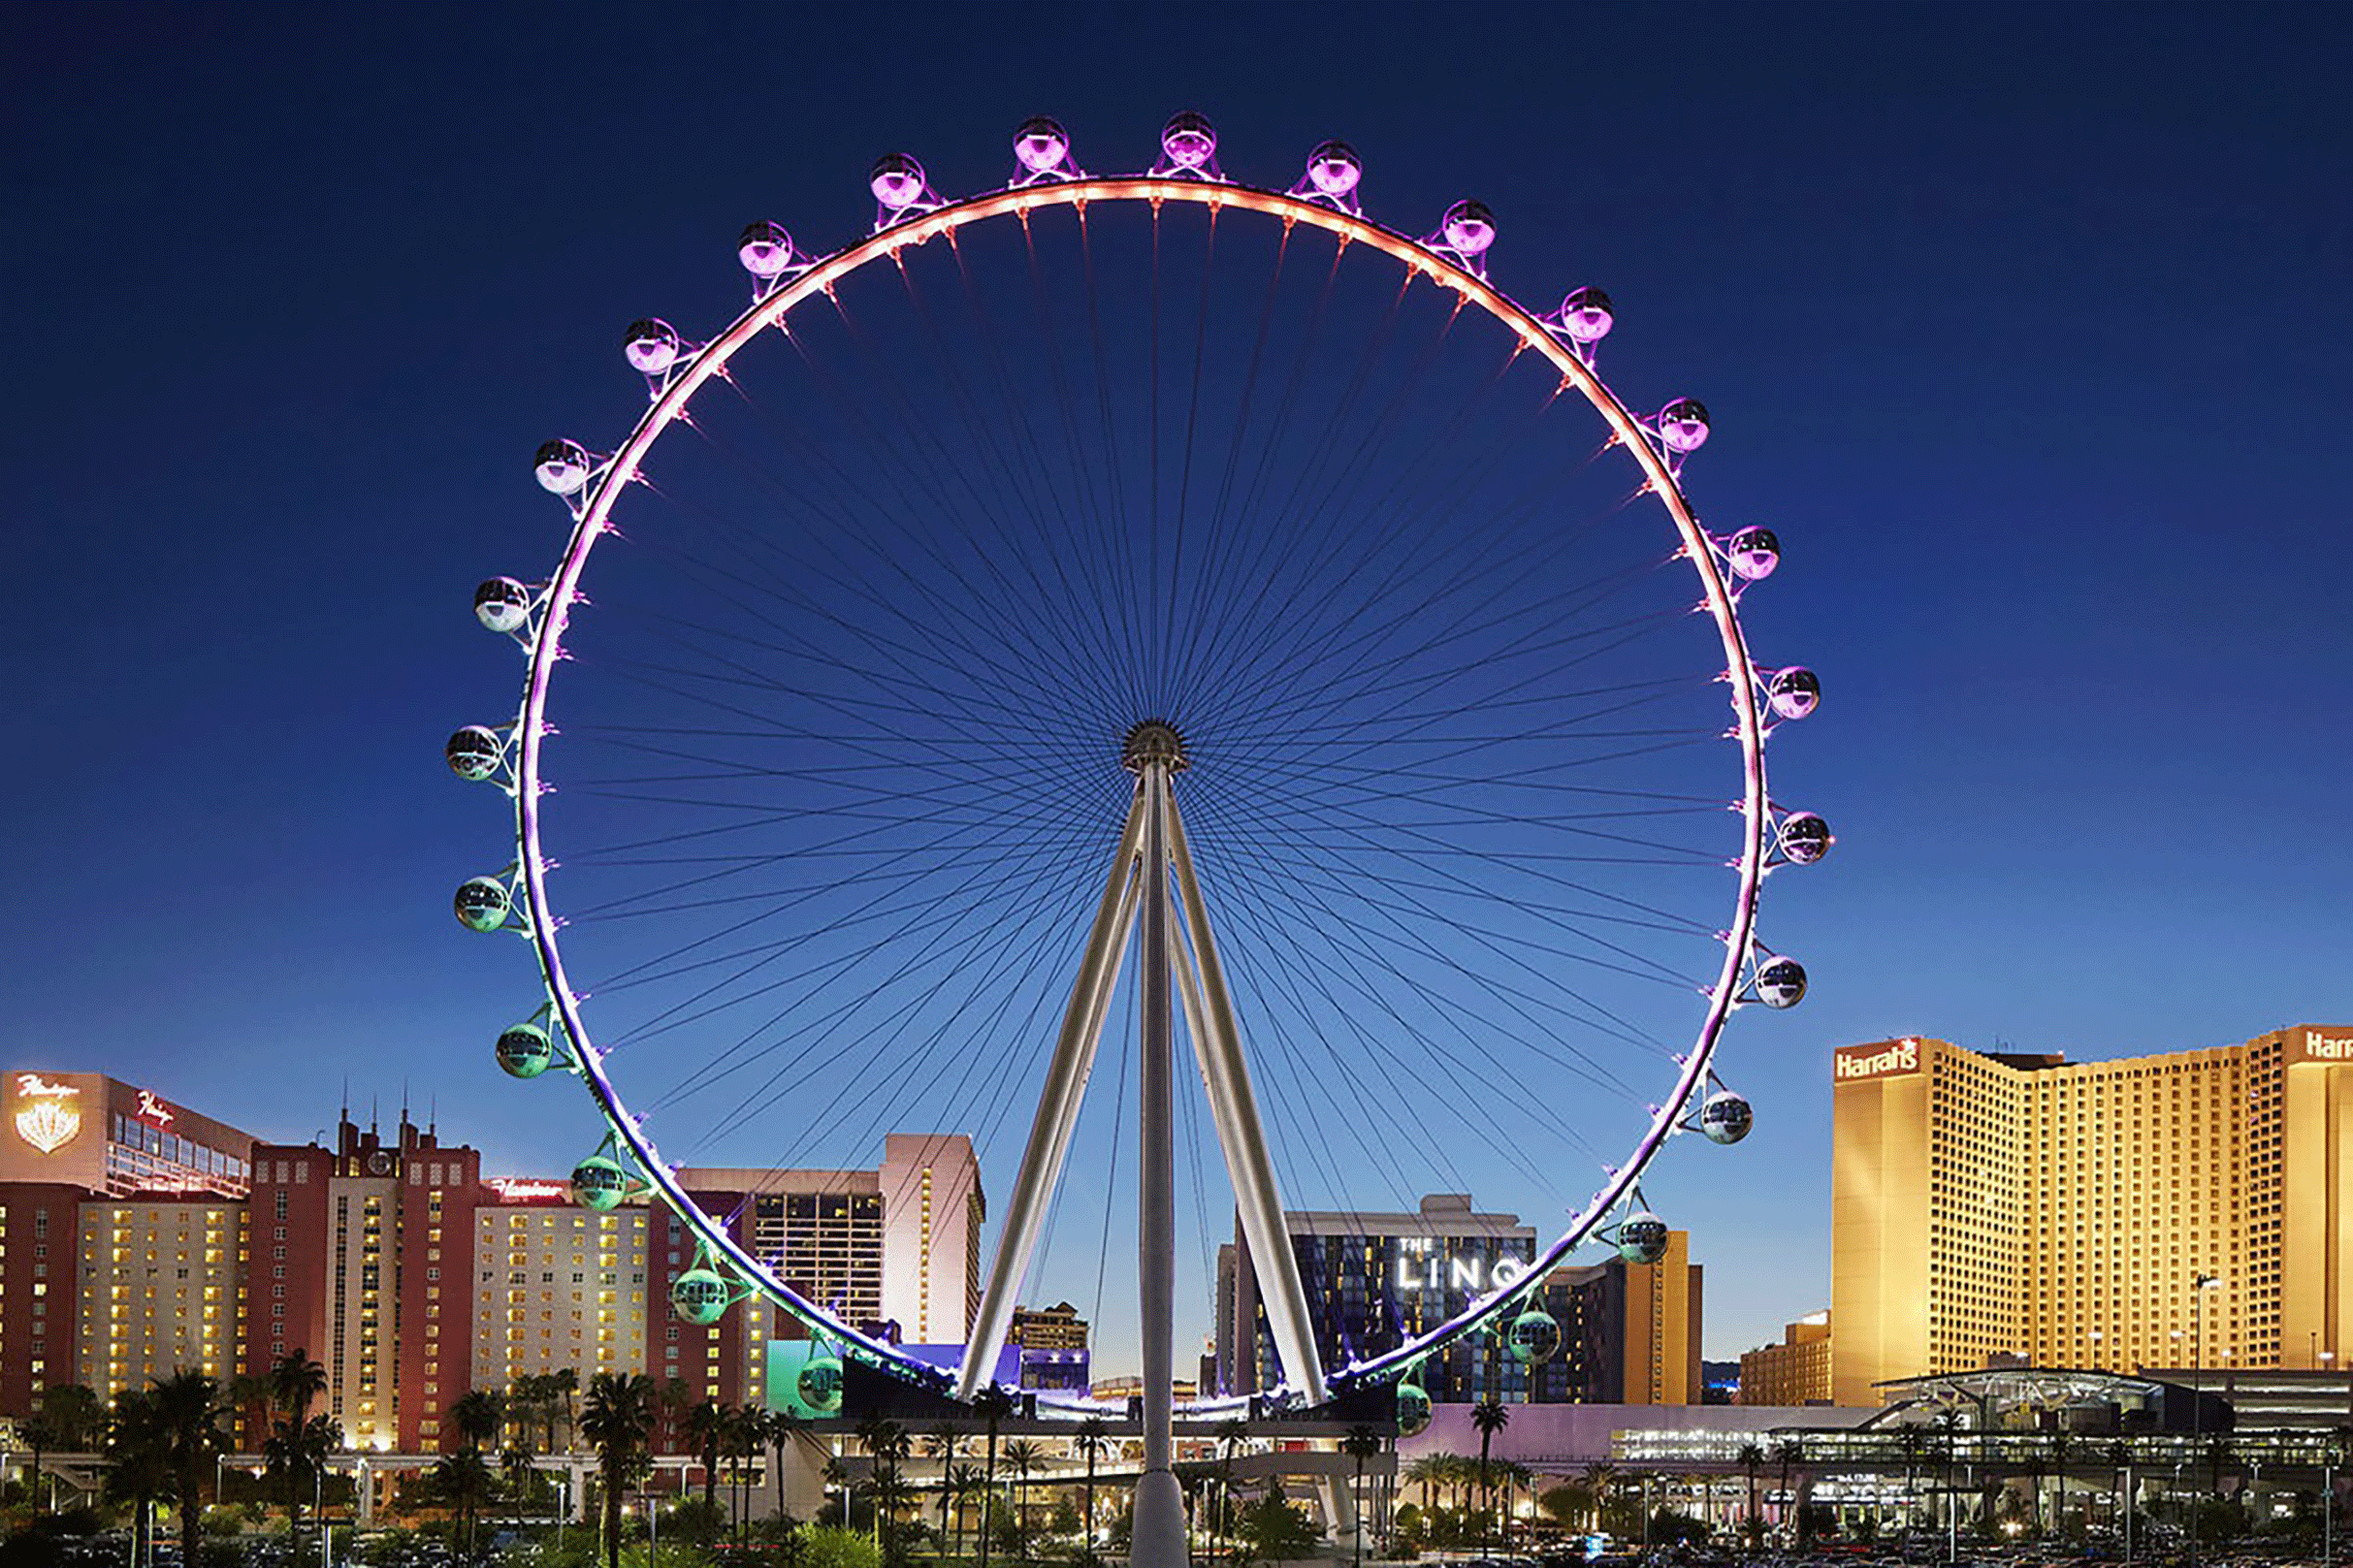 High Roller Wheel at The LINQ at High Roller Wheel at The LINQ Promenade – Las Vegas, NV